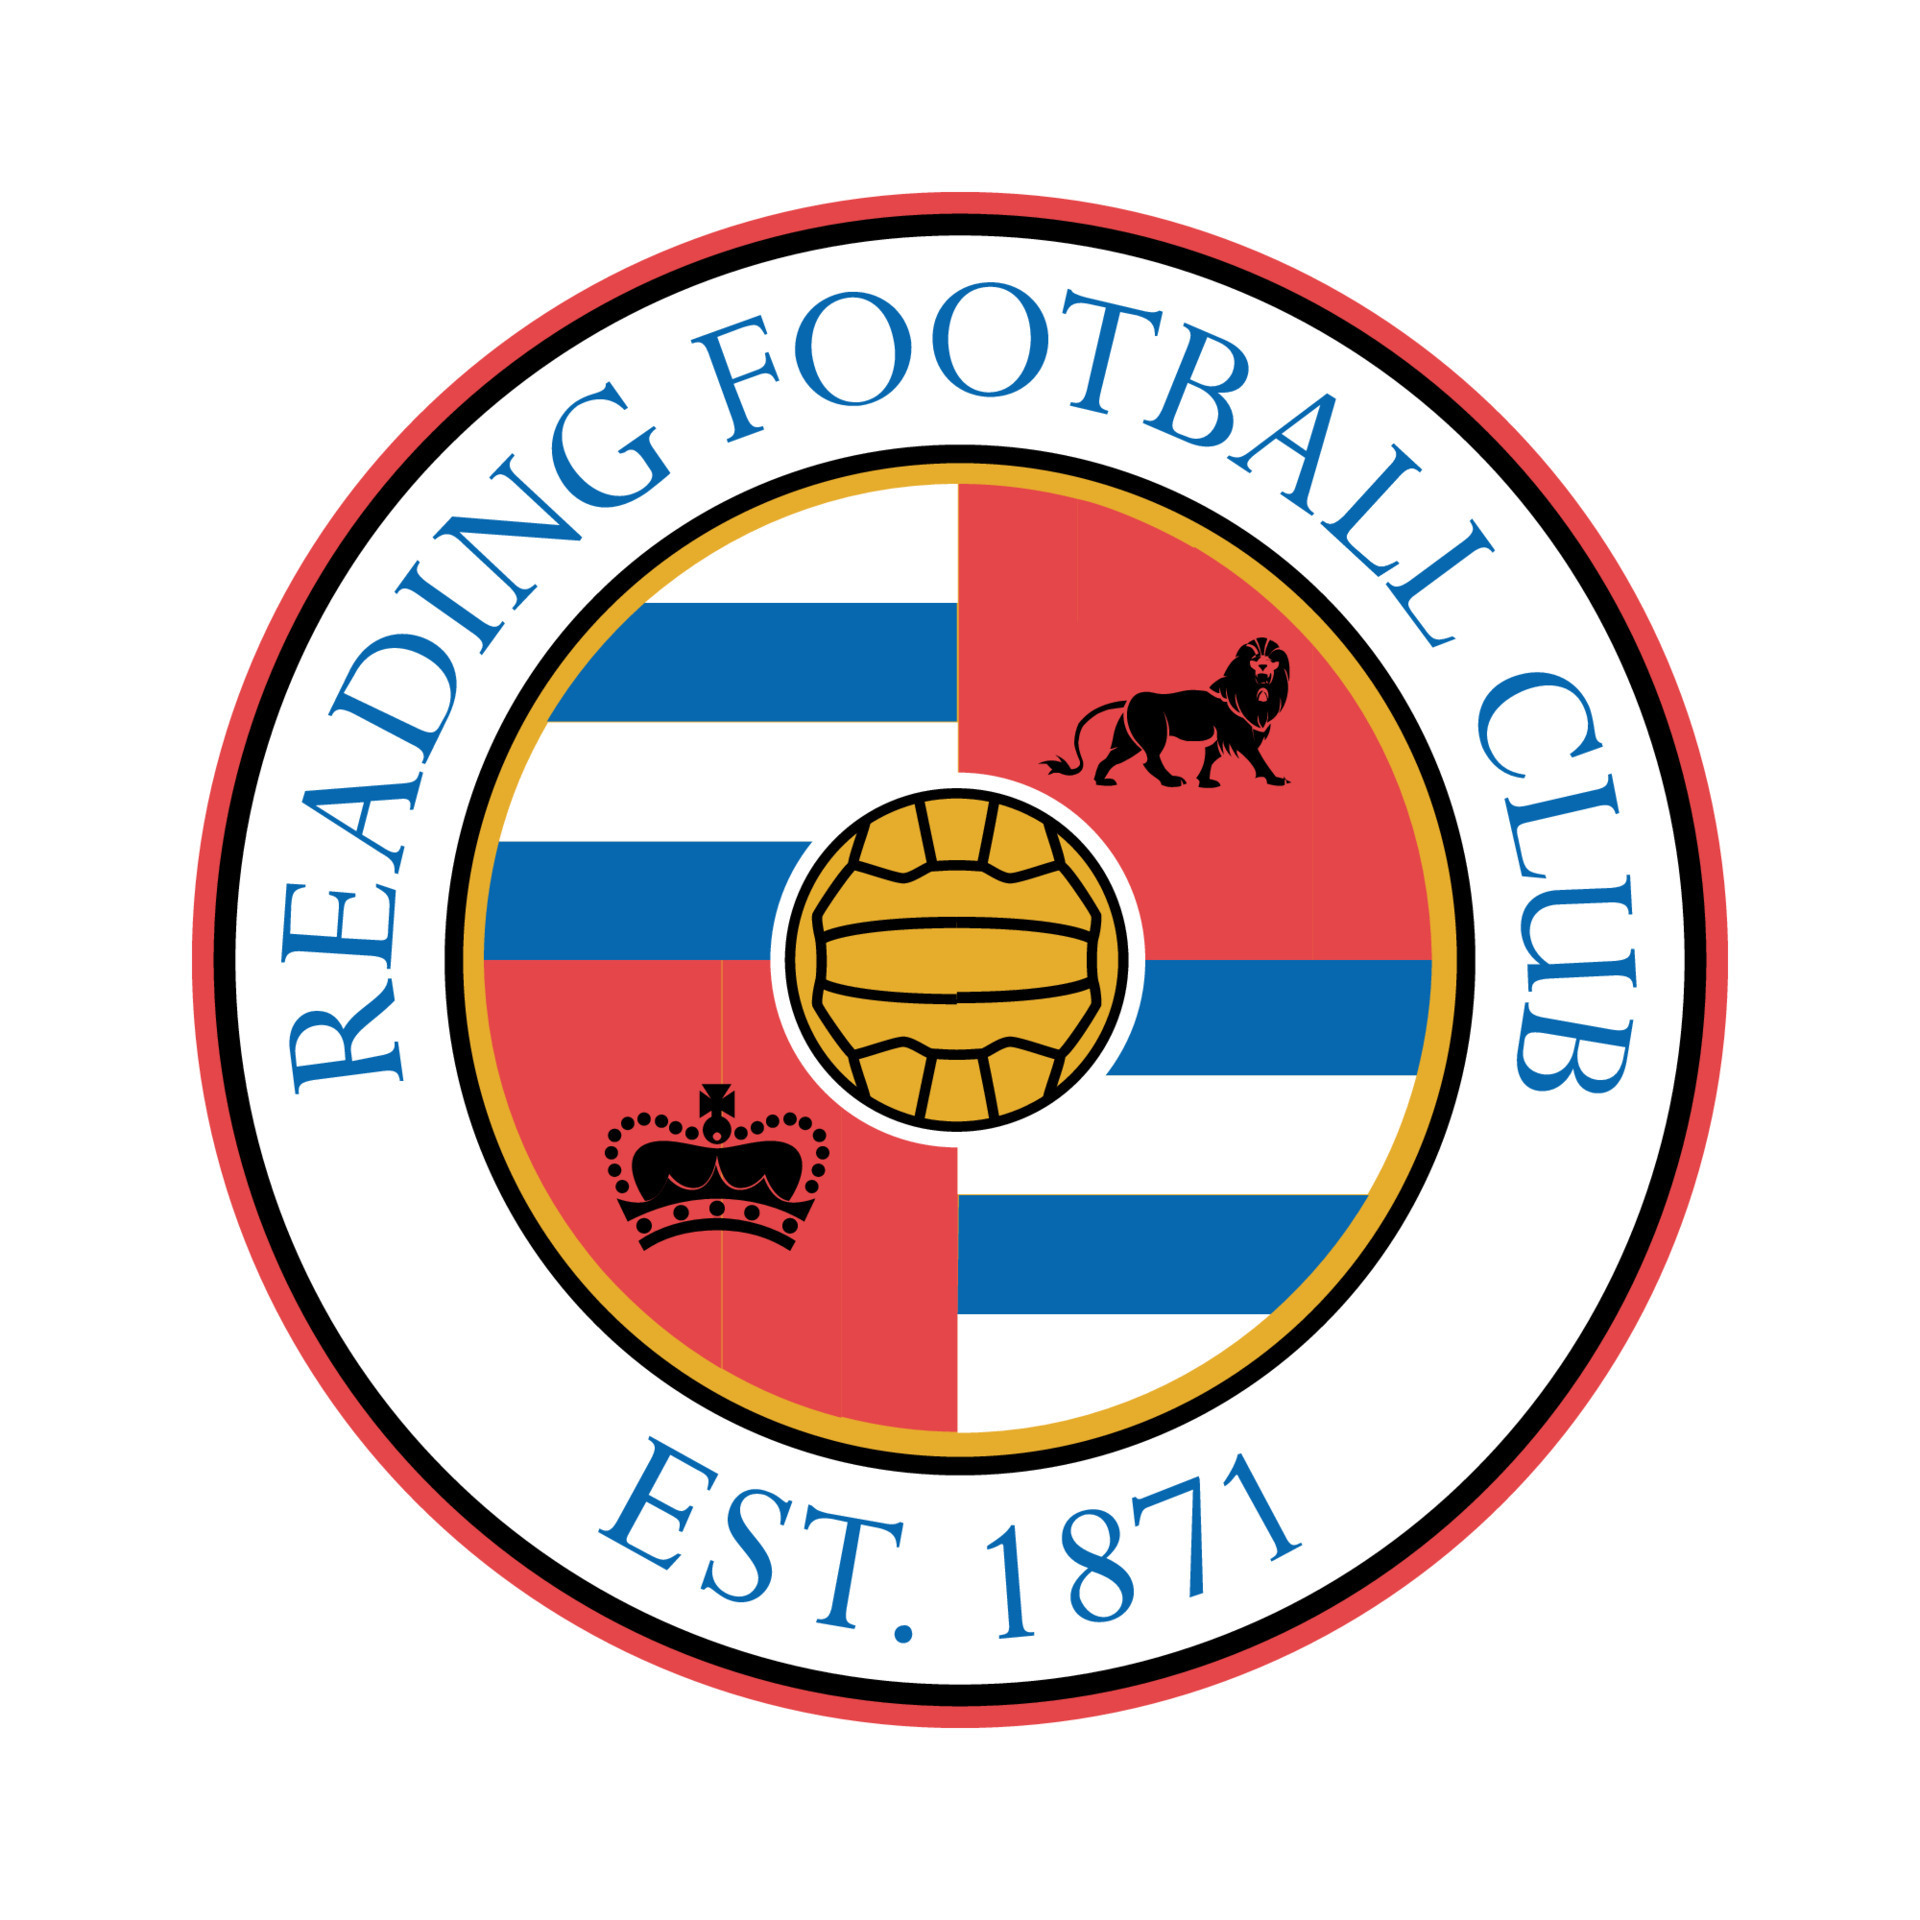 reading-fc-logo-on-transparent-background-free-vector